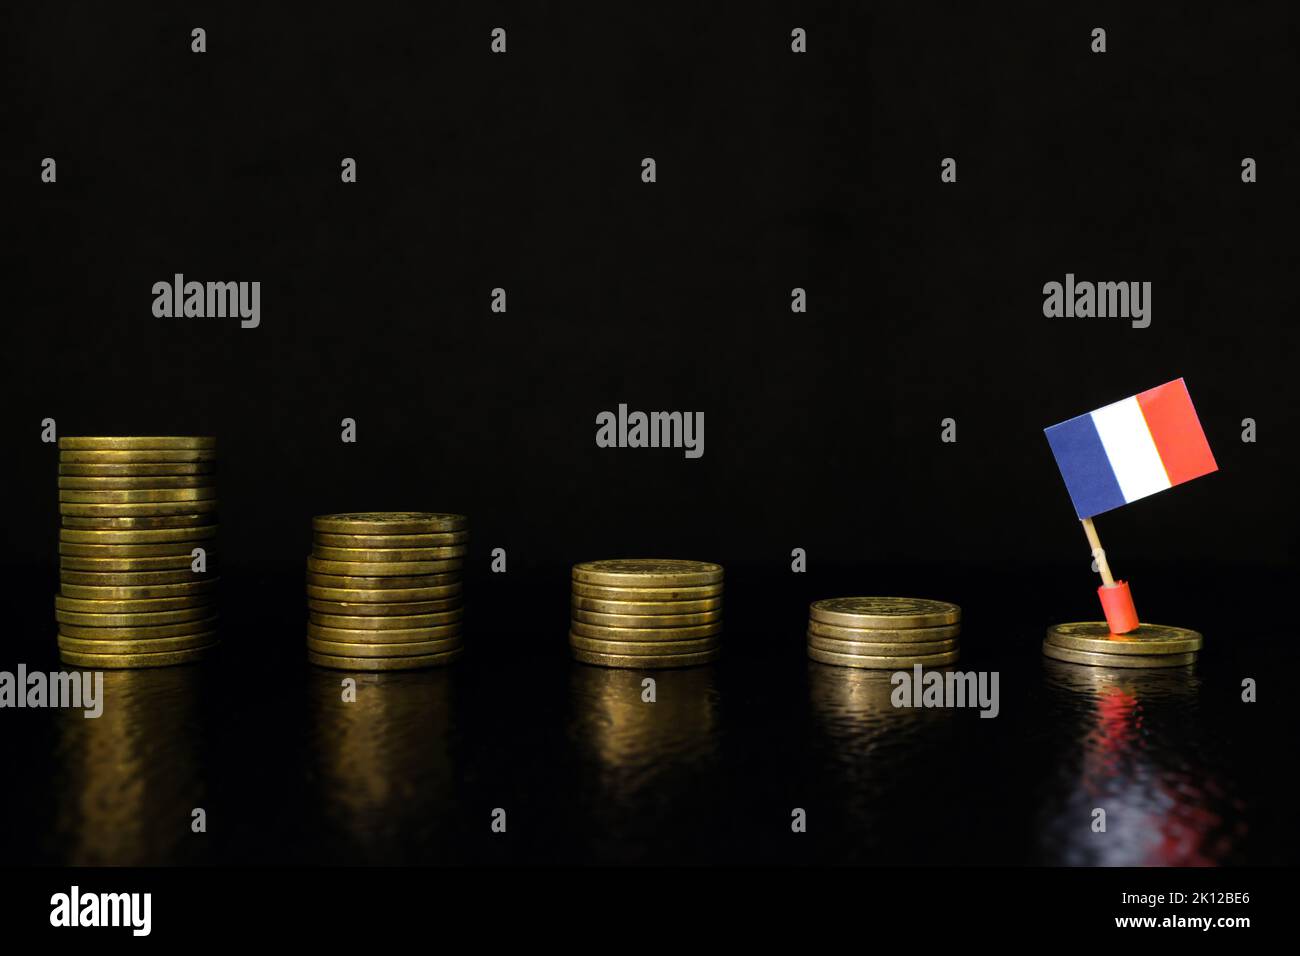 France economic recession, financial crisis and currency depreciation concept. French flag in decreasing stack of coins in dark black background. Stock Photo